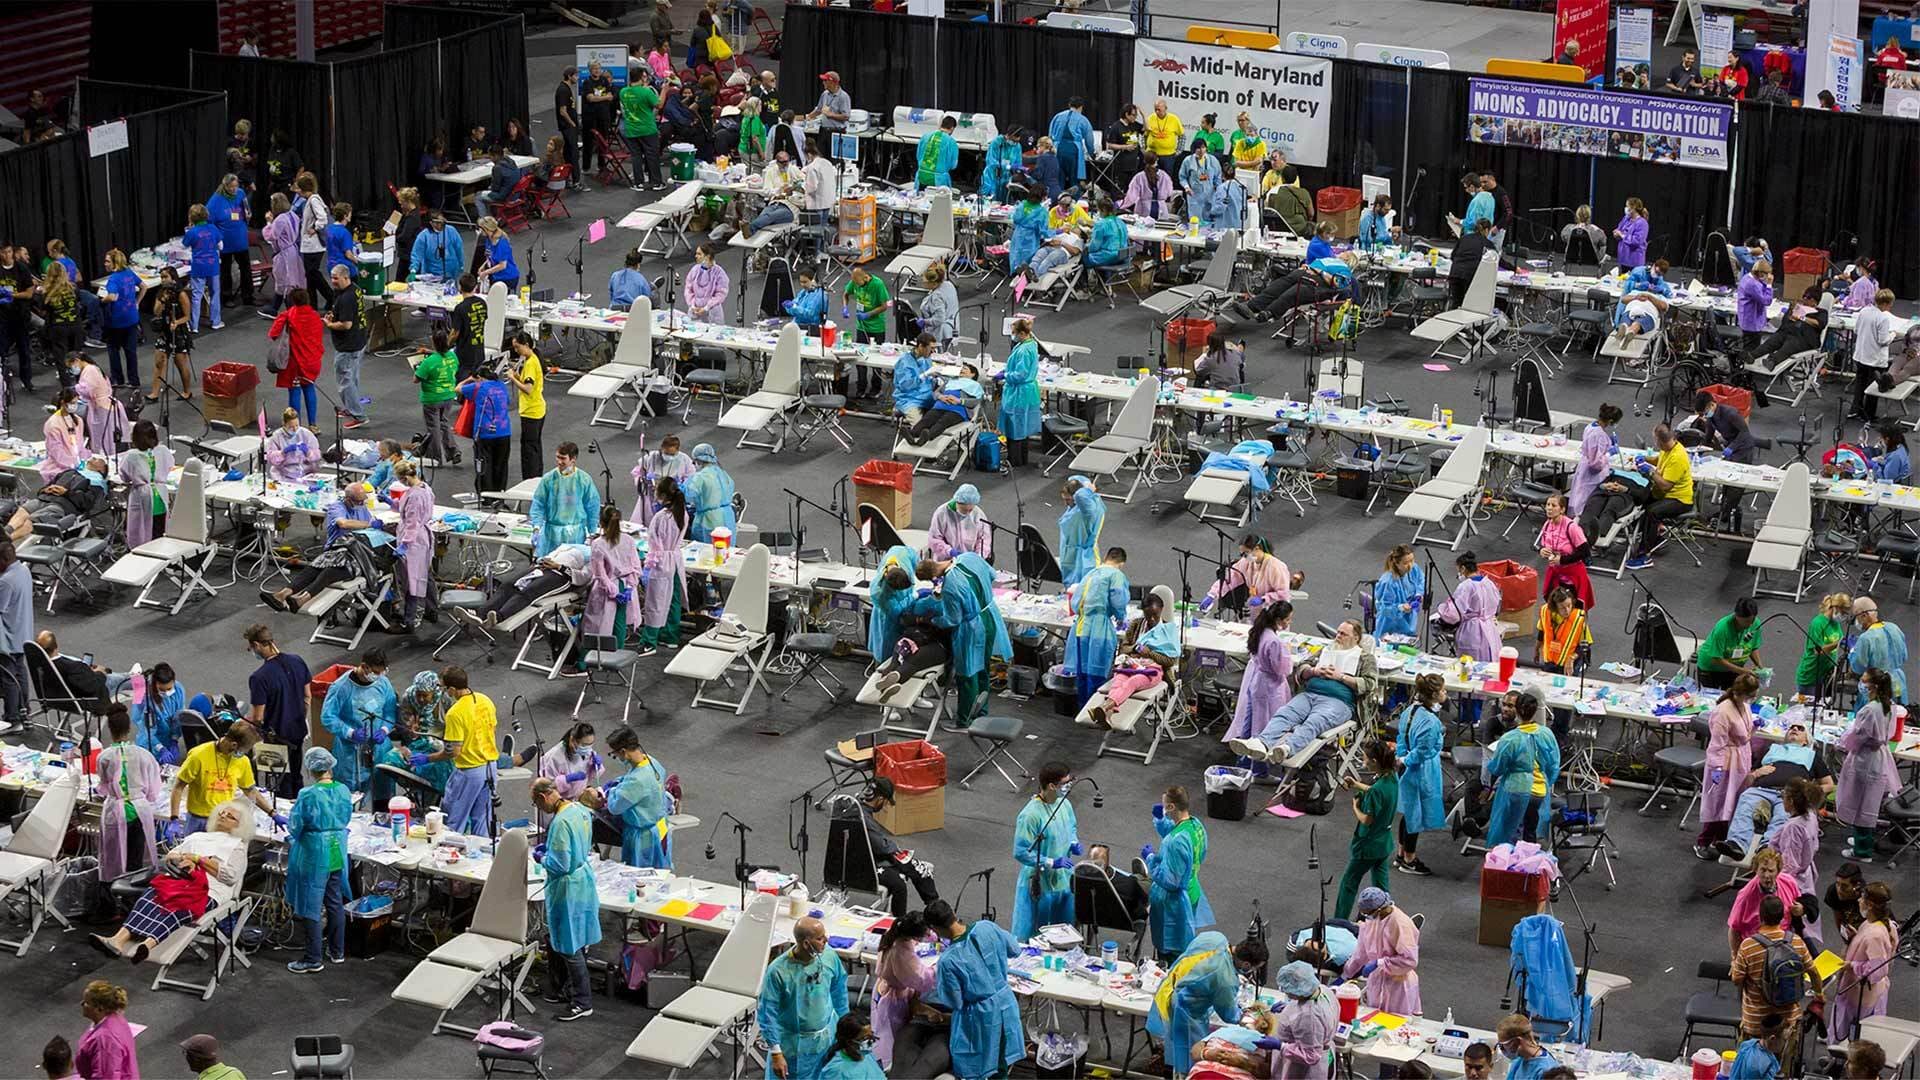 Mid-Maryland Mission of Mercy Dental Clinic